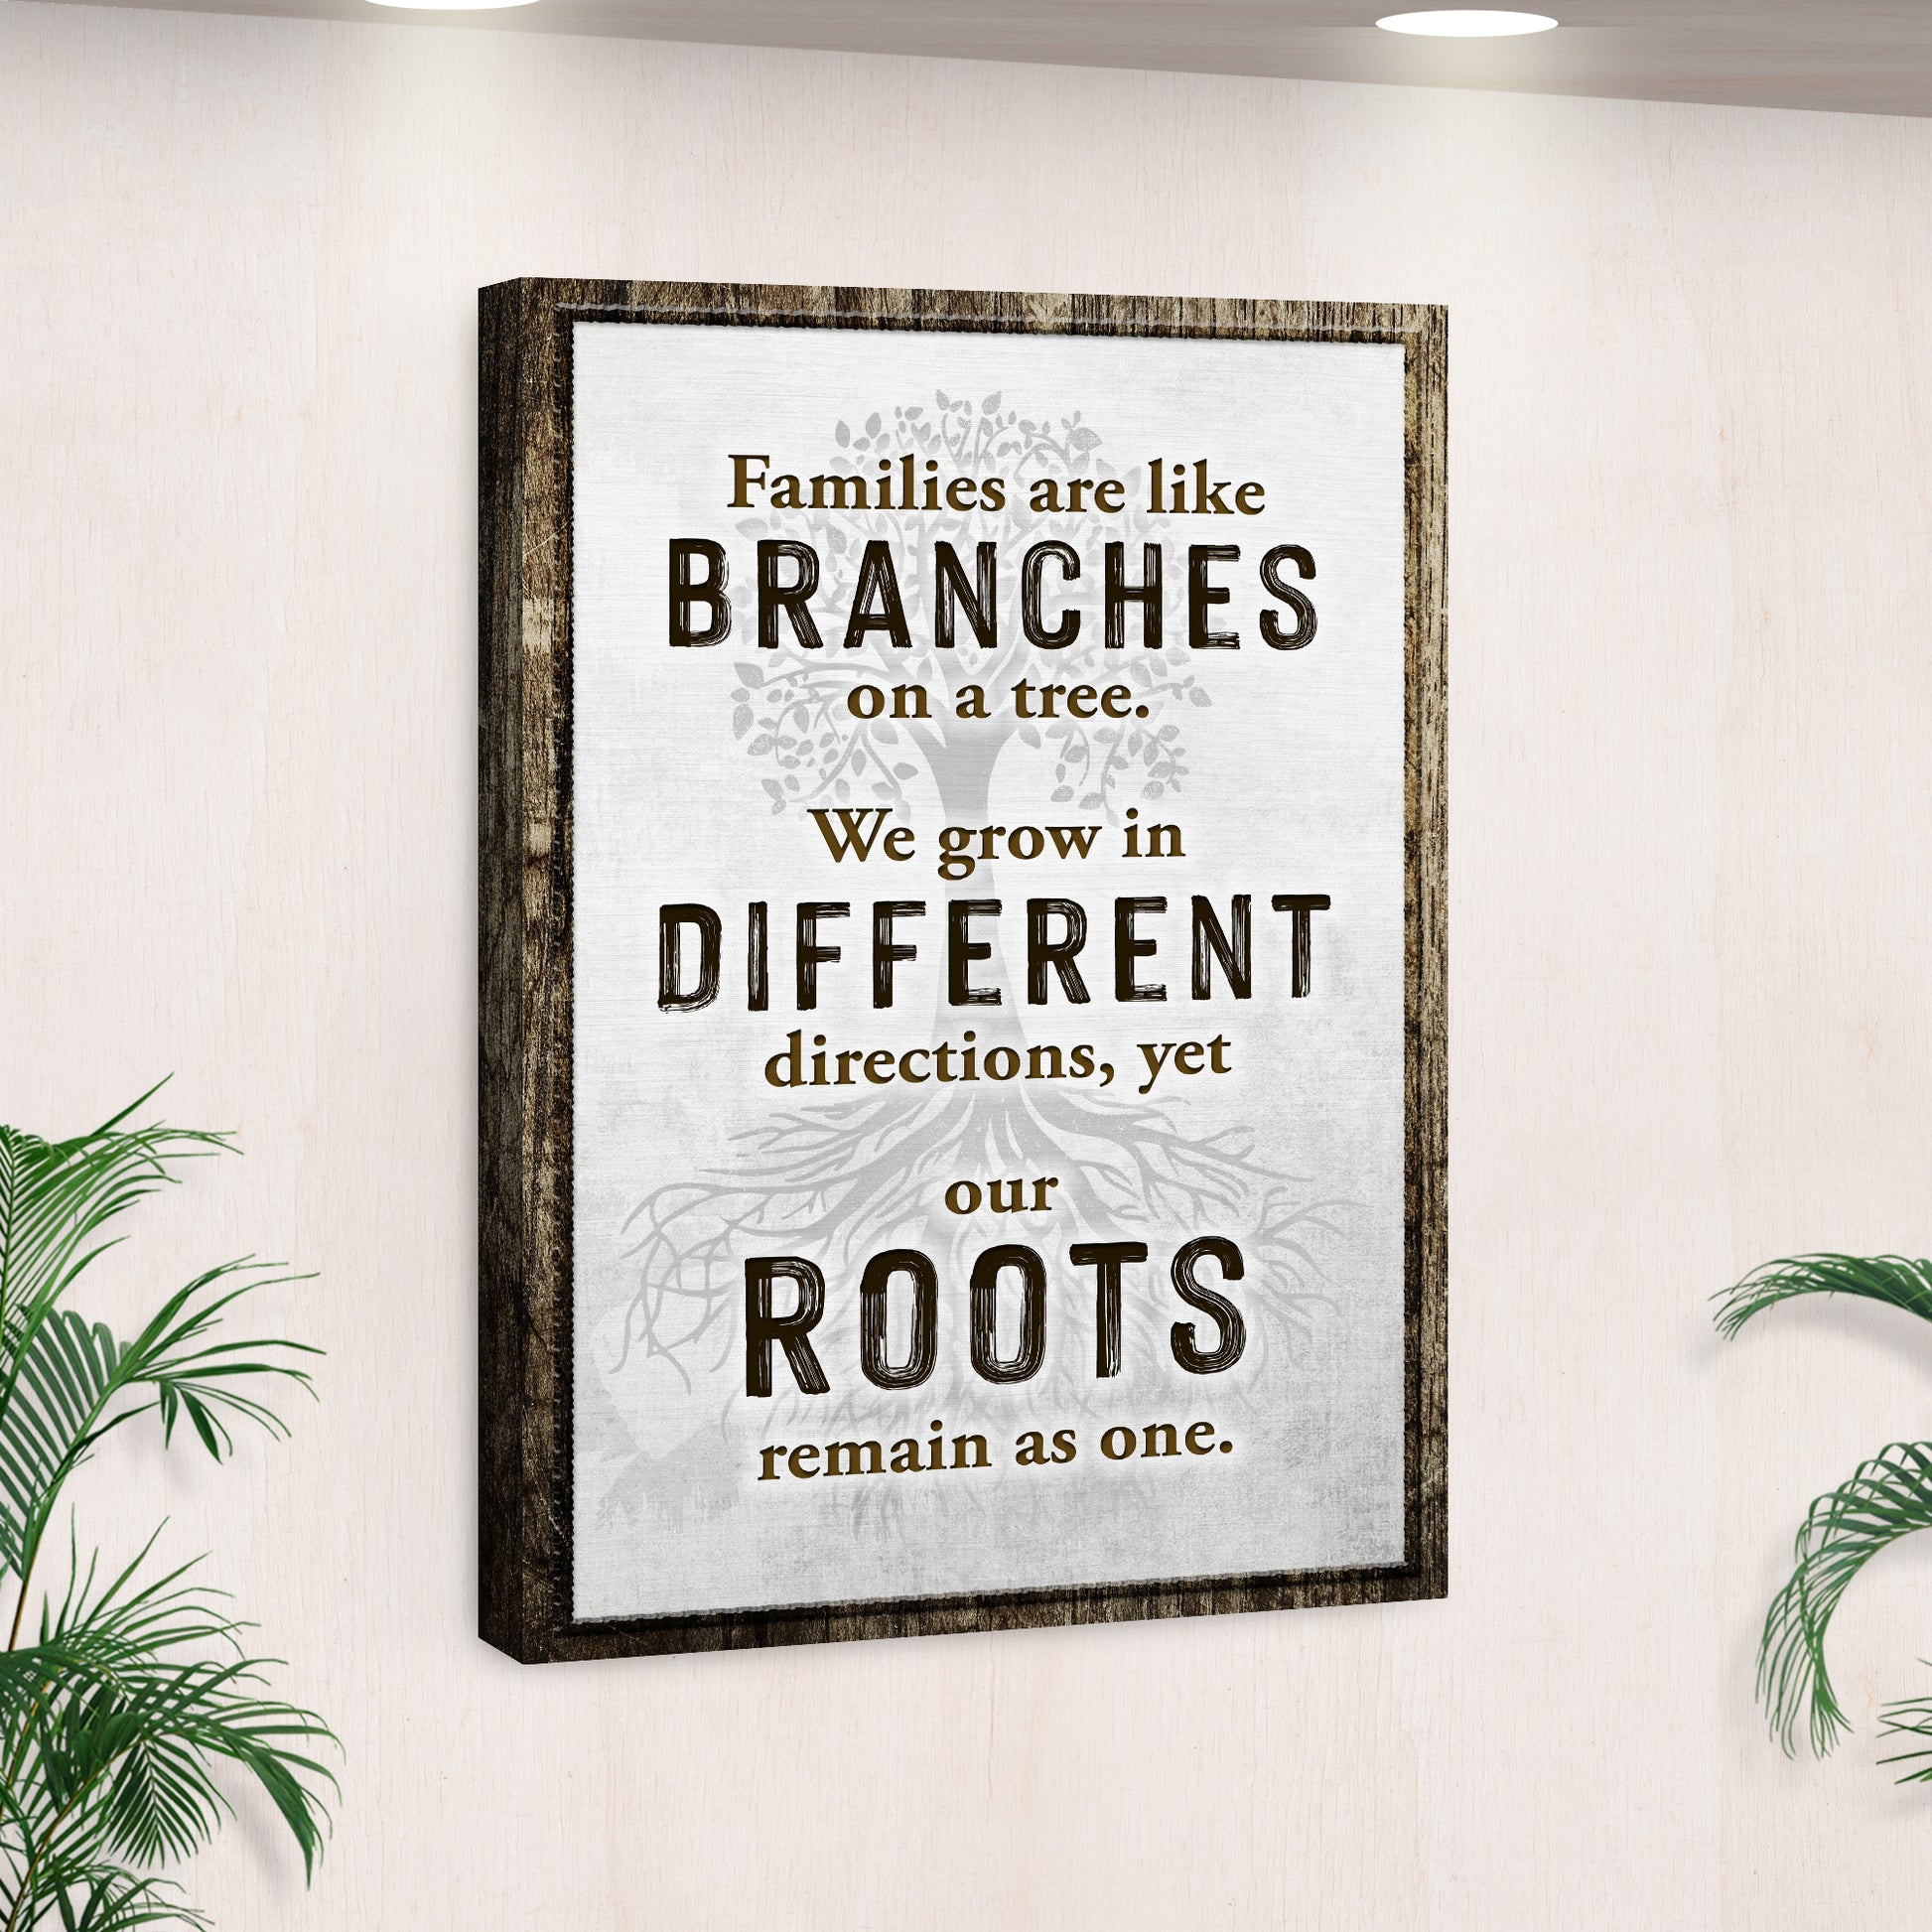 Family Is Like Branches On A Tree Sign II - Image by Tailored Canvases